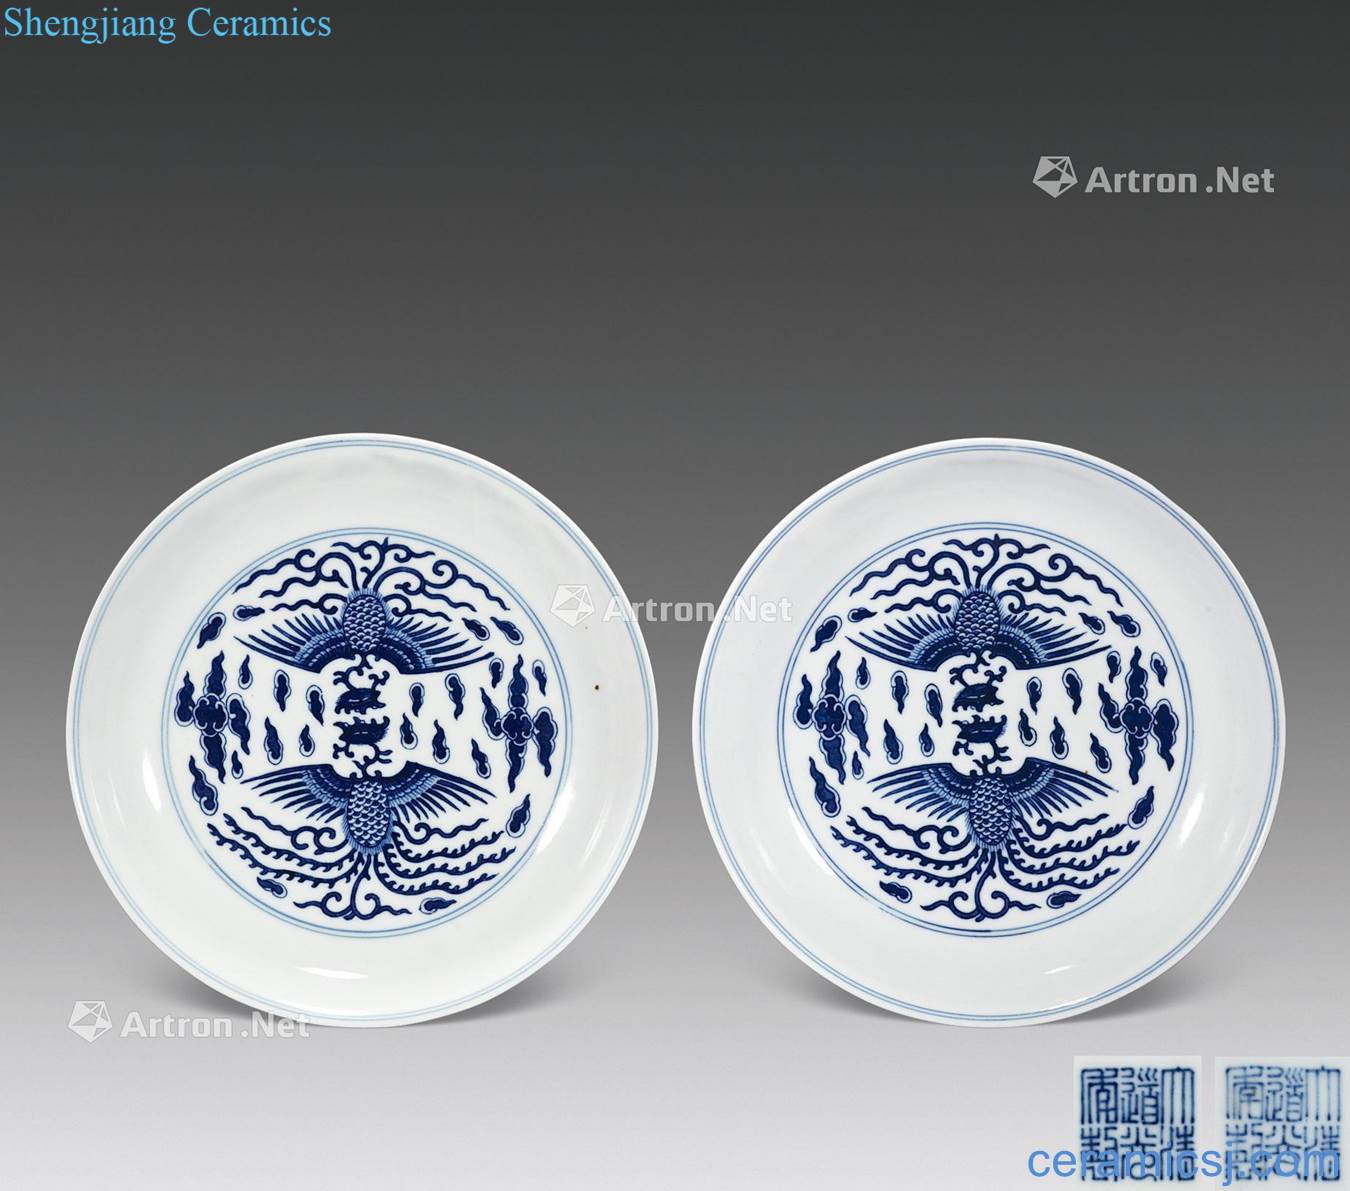 Qing daoguang Blue and white double phoenix tray (a)